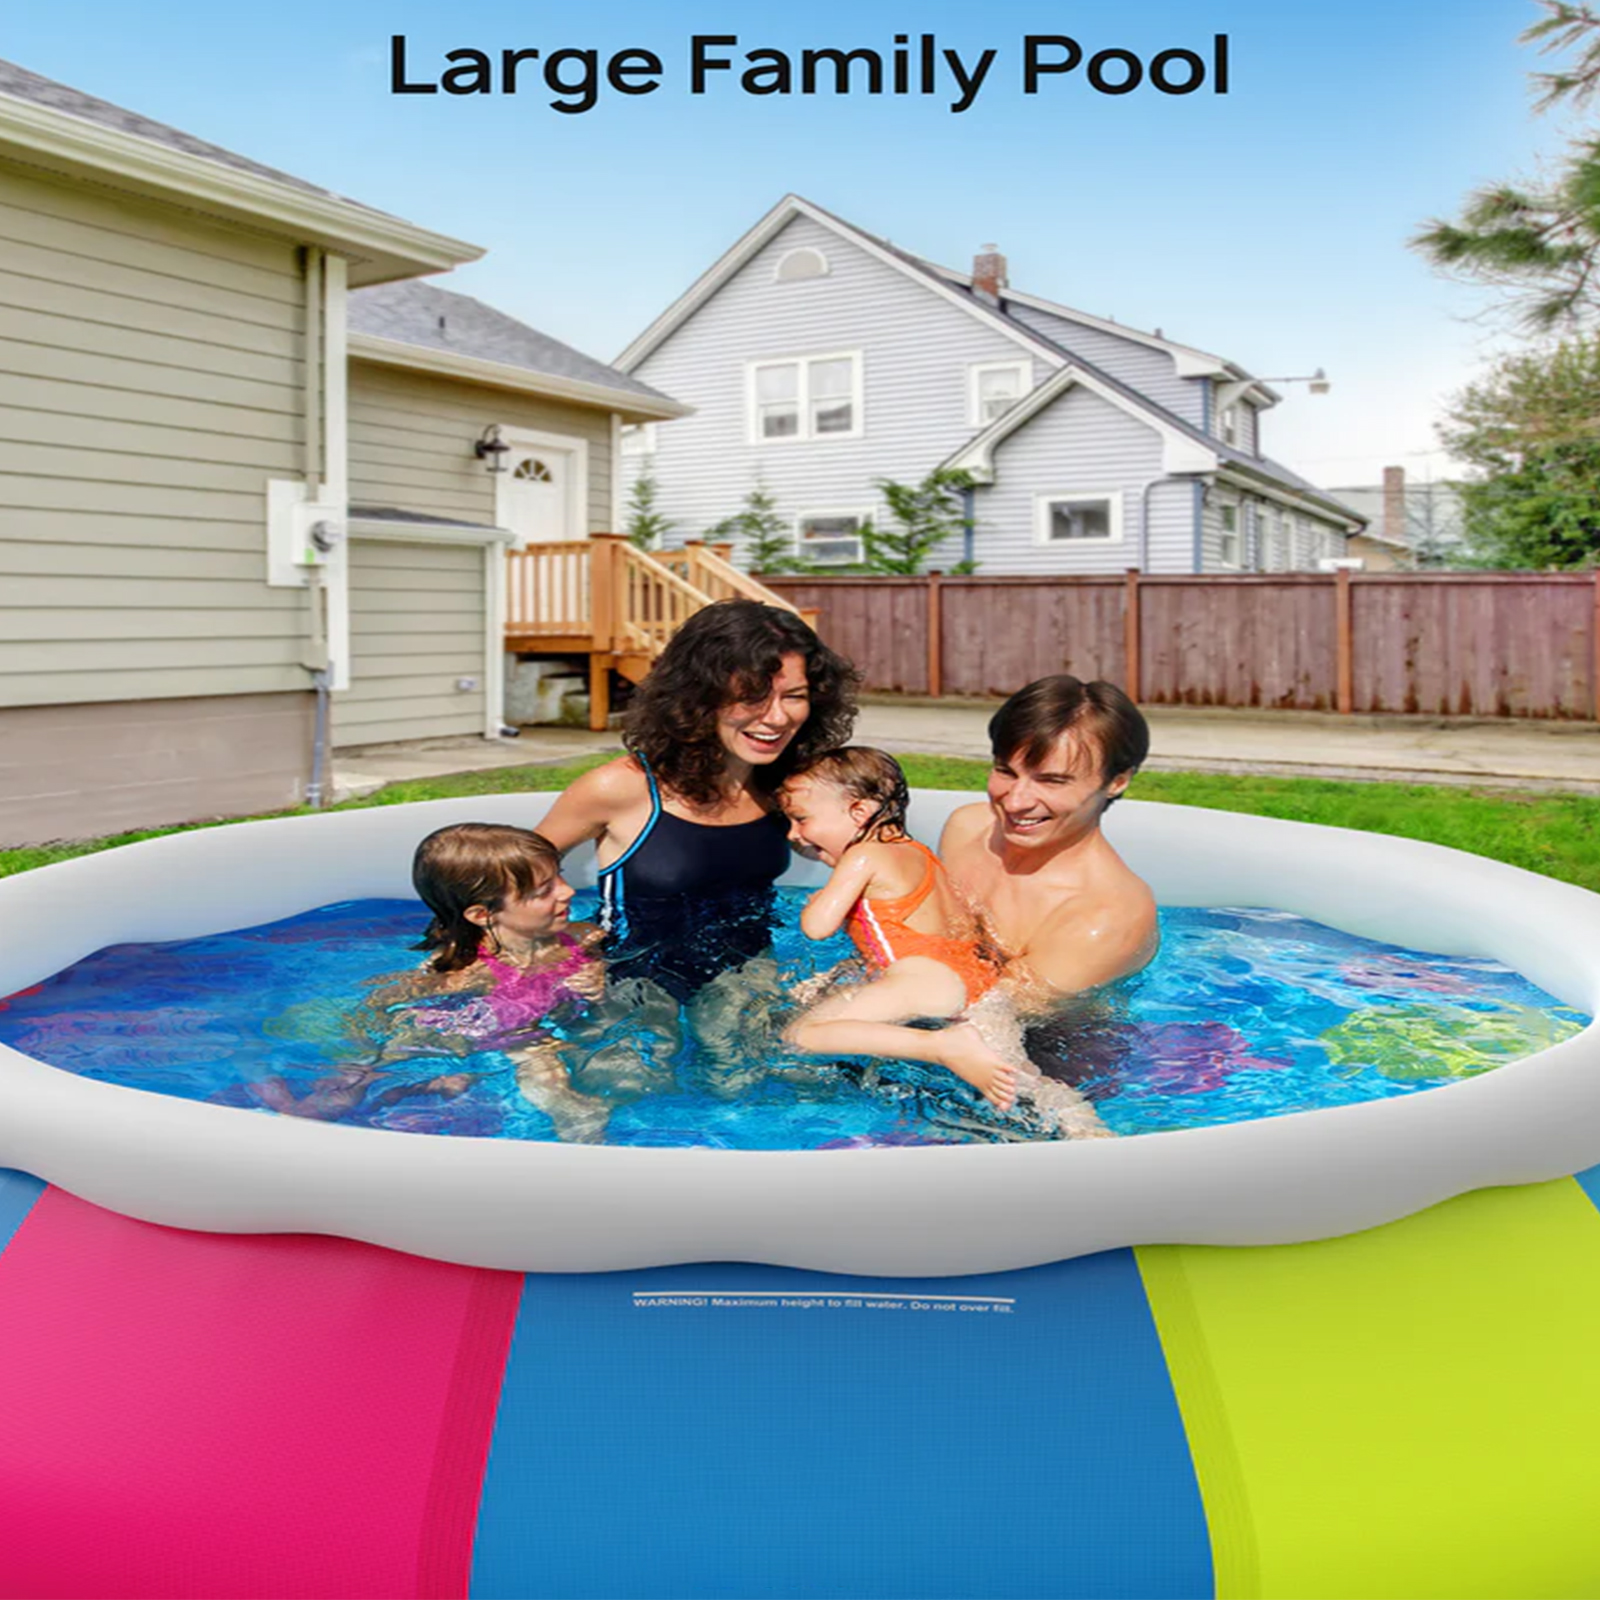 Family 10ft x 30in Above Ground Inflatable Round Swimming Pool - image 7 of 7